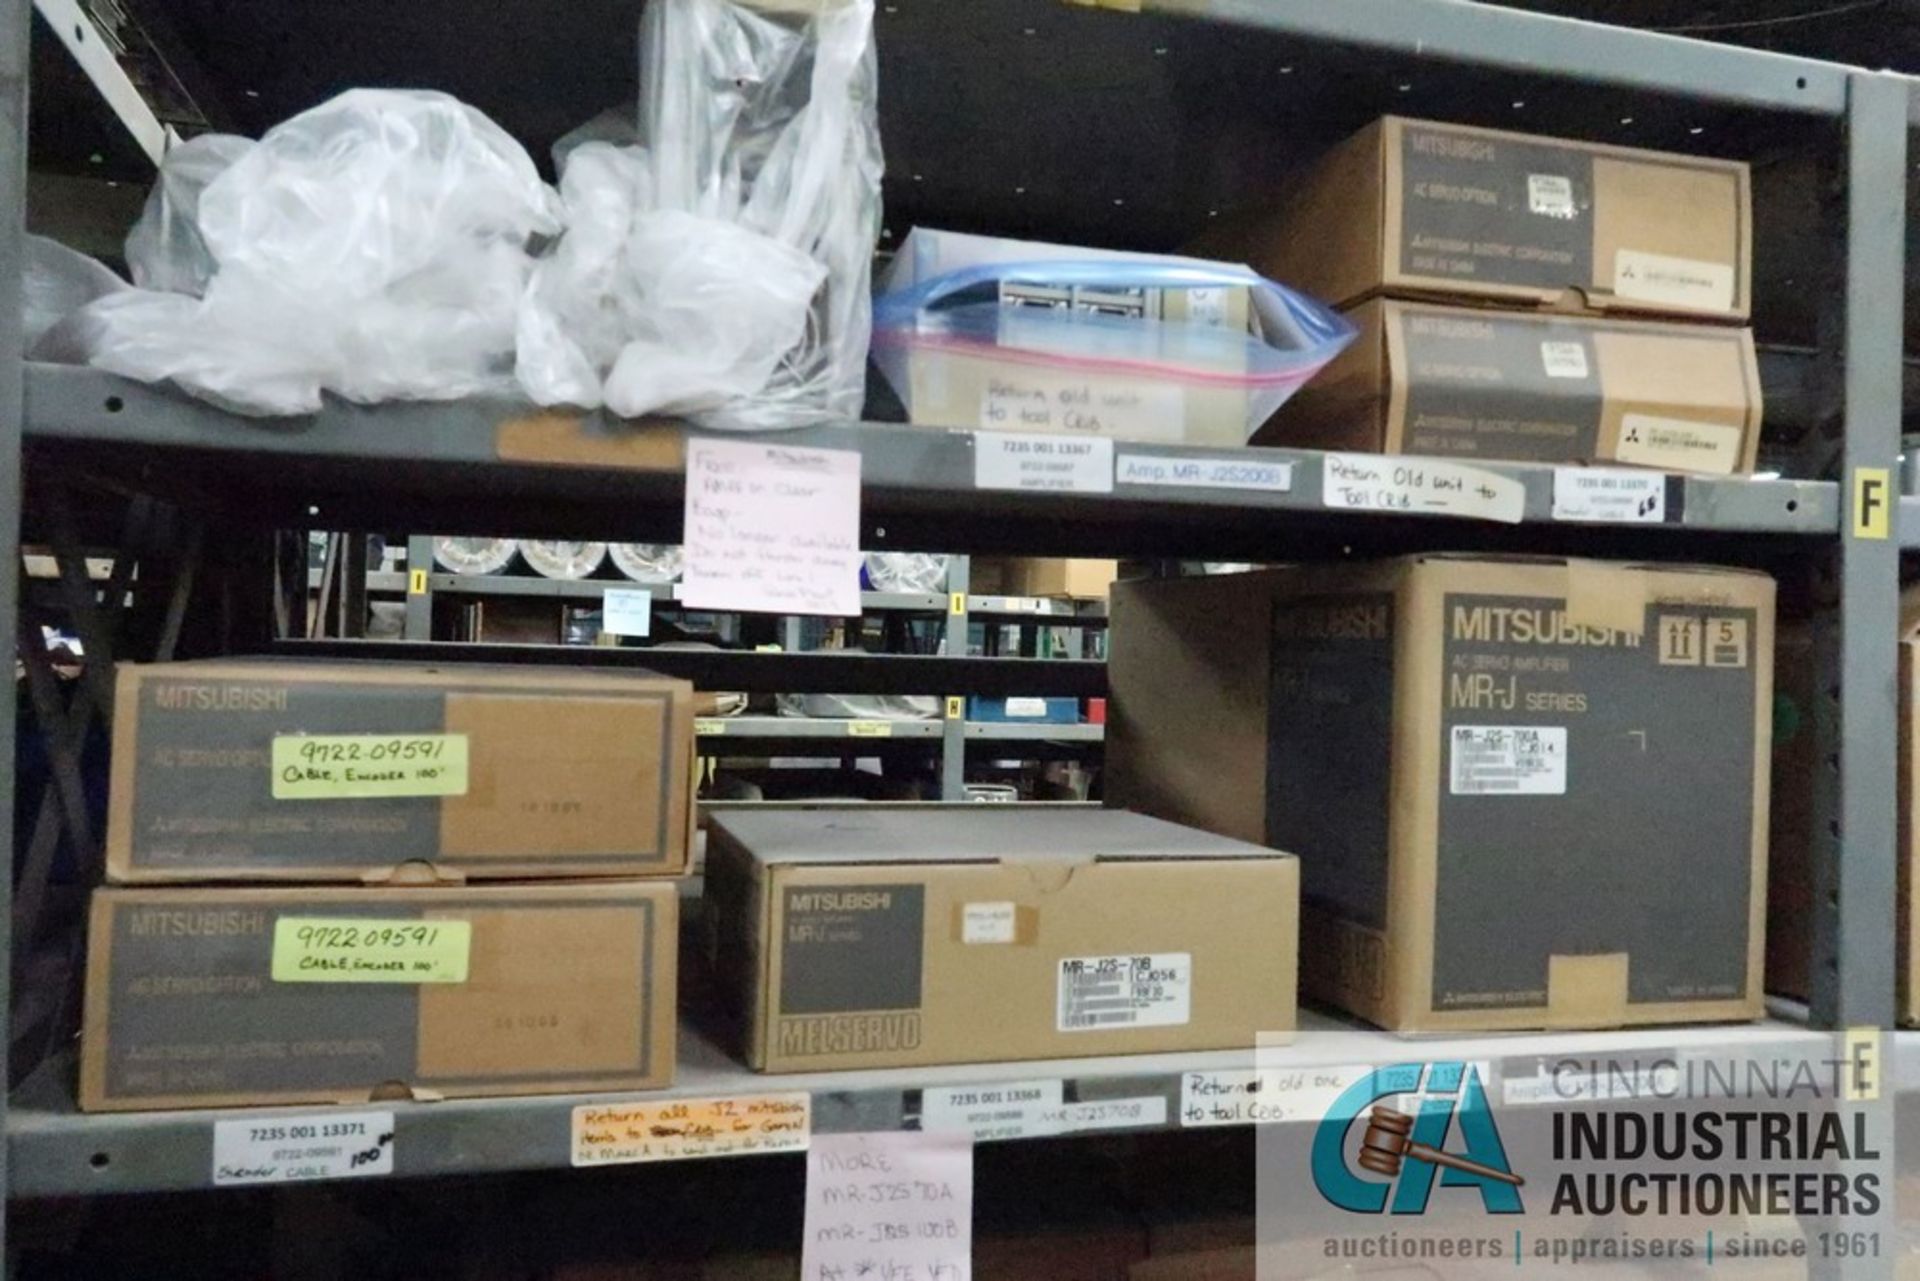 (LOT) (8) SECTIONS STEEL SHELVING W/ MISC. MODULES, CONTROLLERS, VELDING SYSTEMS, PUMPS, LIGHT - Image 13 of 16